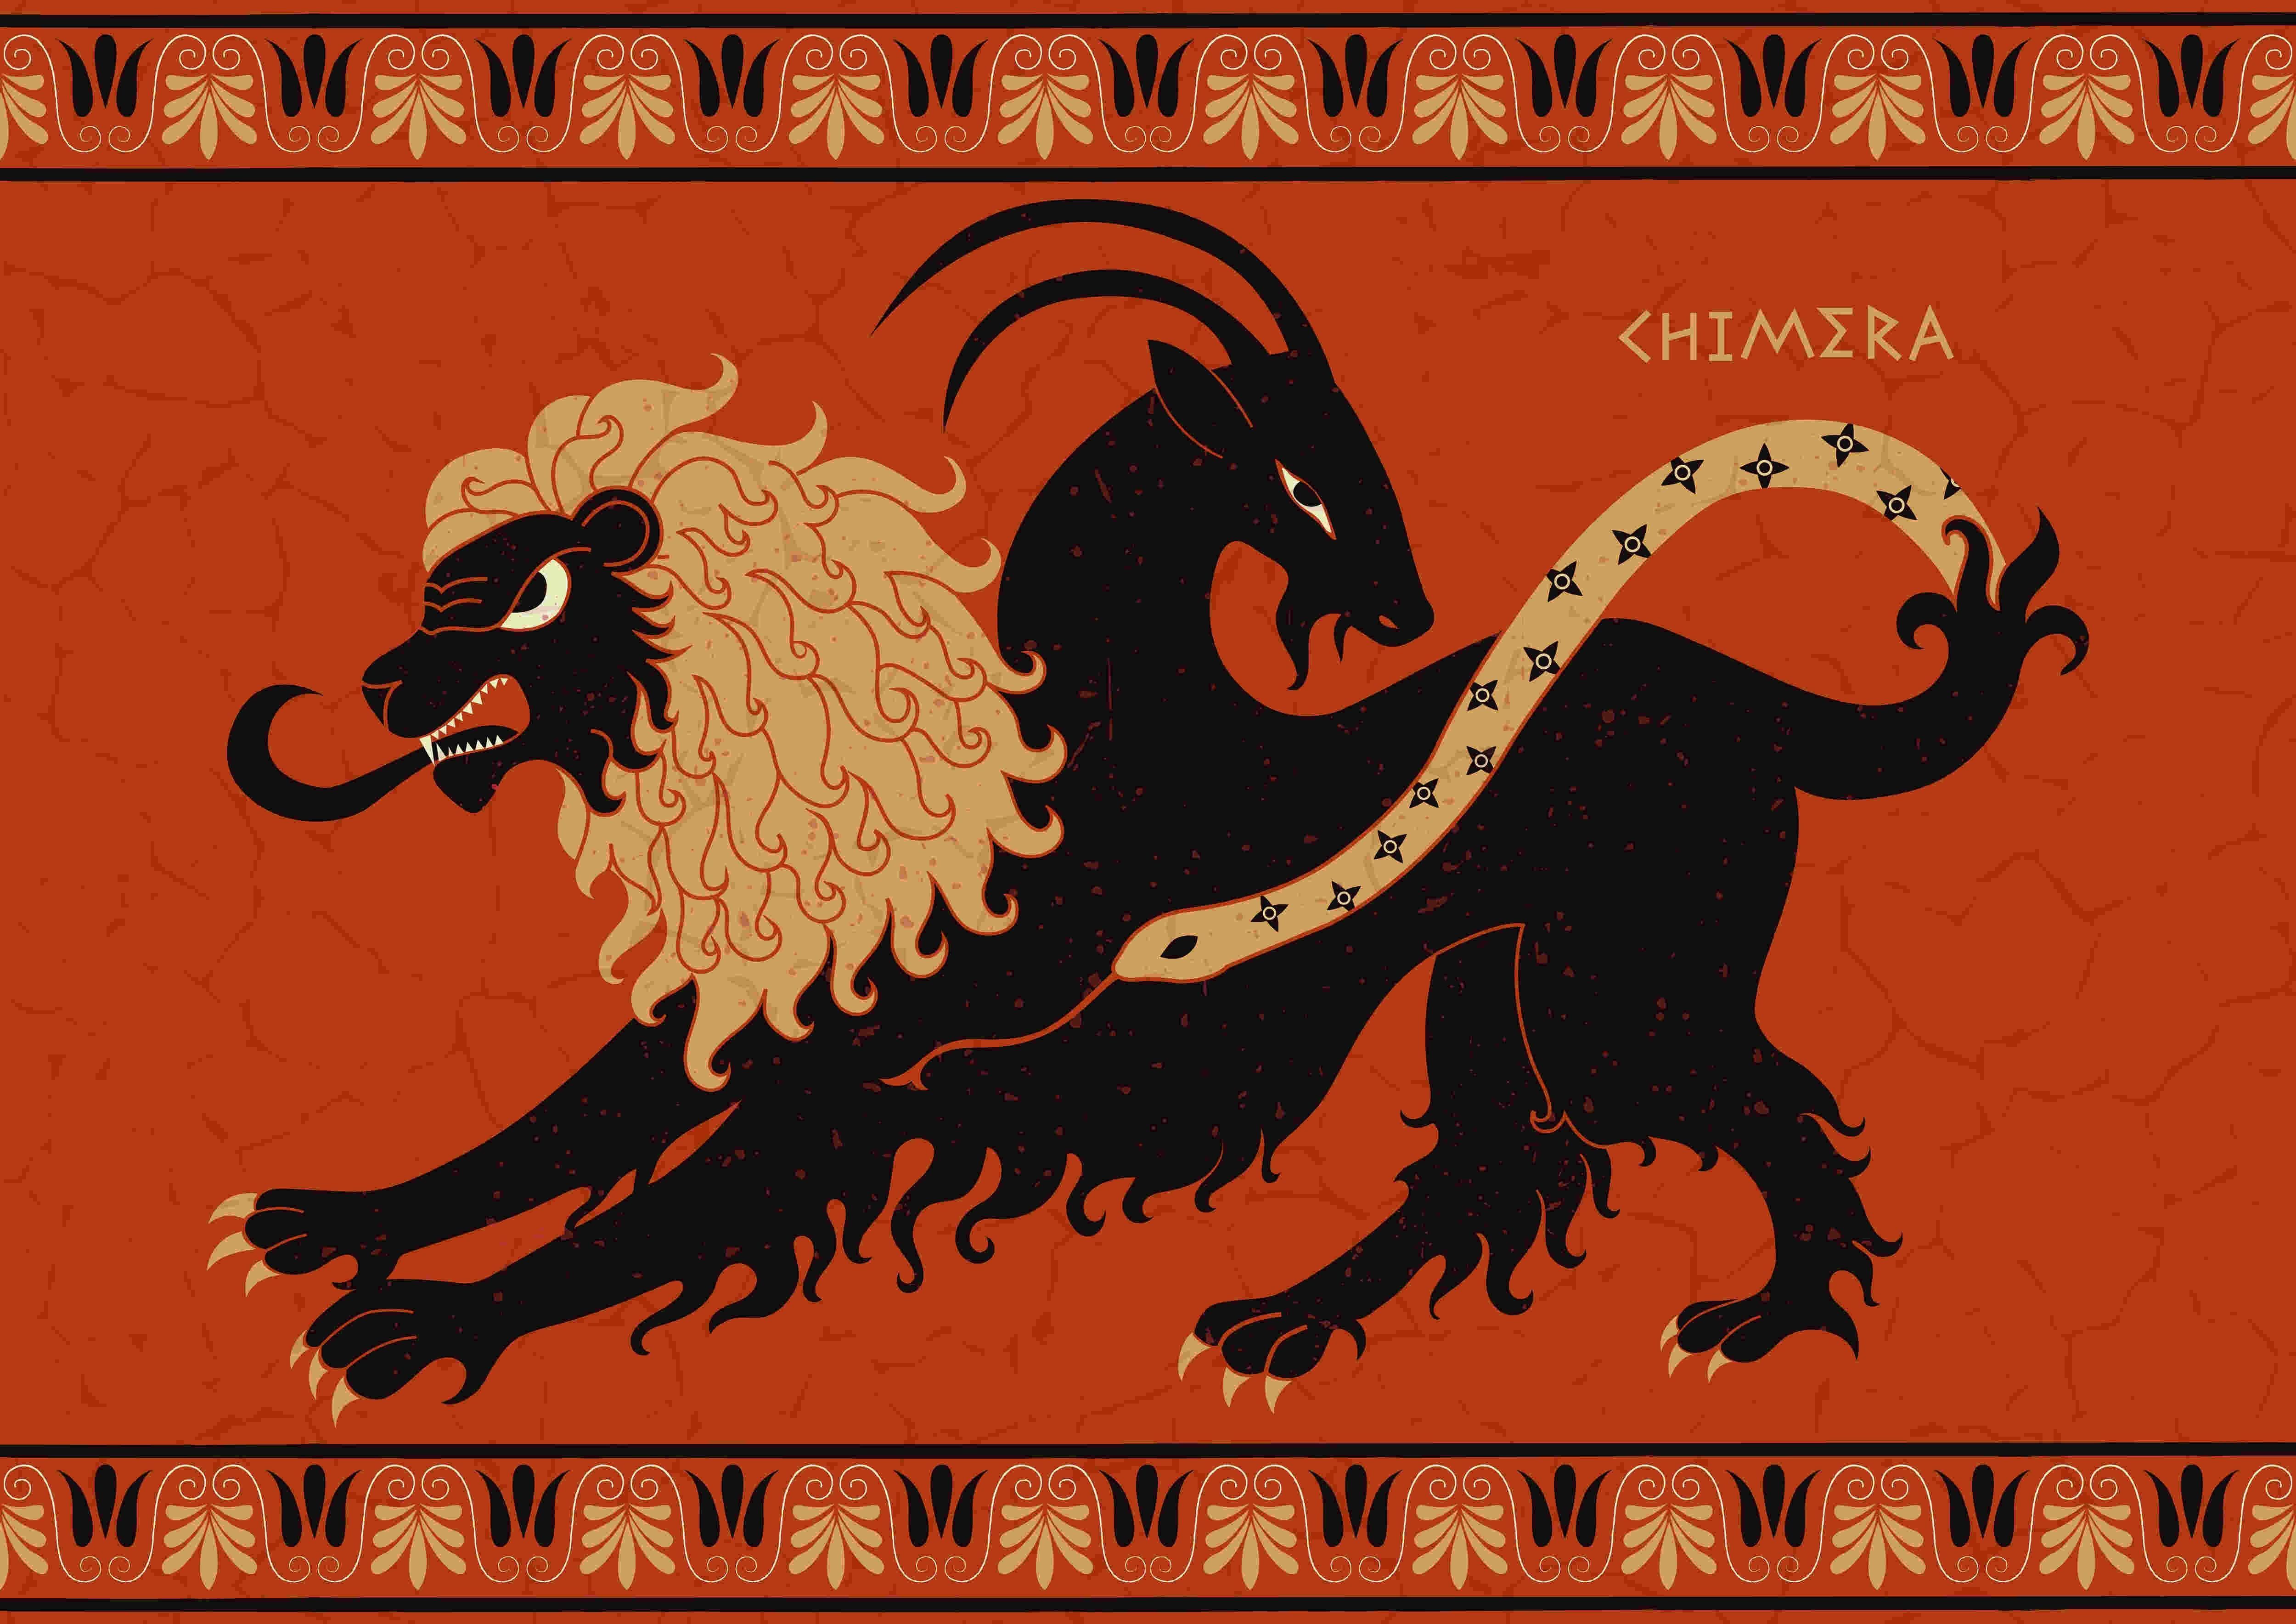 Ancient Greek mythology. Chimera. Monster with the head of a lion, a goat and a snake. Vector illustration in the style of Greek vase painting.